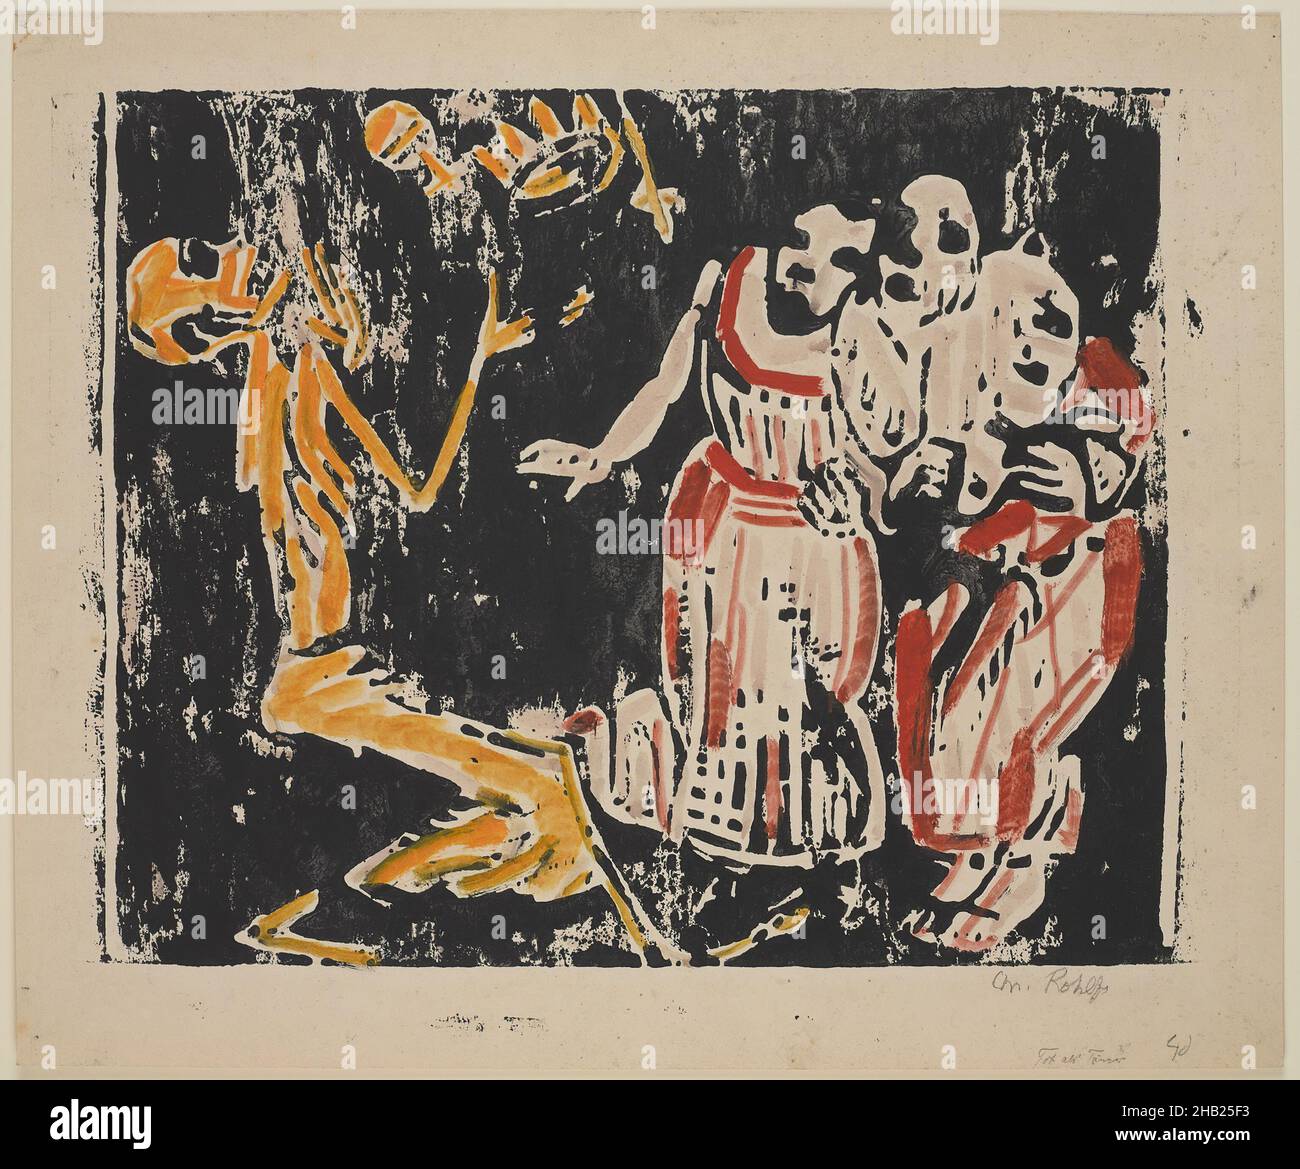 Death as Juggler, Revolution, Tod als Jongleur [Revolution], Christian Rohlfs, German, 1849-1939, Color woodcut in yellow, red, and black on heavy wove paper, Germany, 1918-1919, Image: 14 3/8 x 18 1/4 in., 36.5 x 46.4 cm, fear, scary, skeleton, spooky Stock Photo